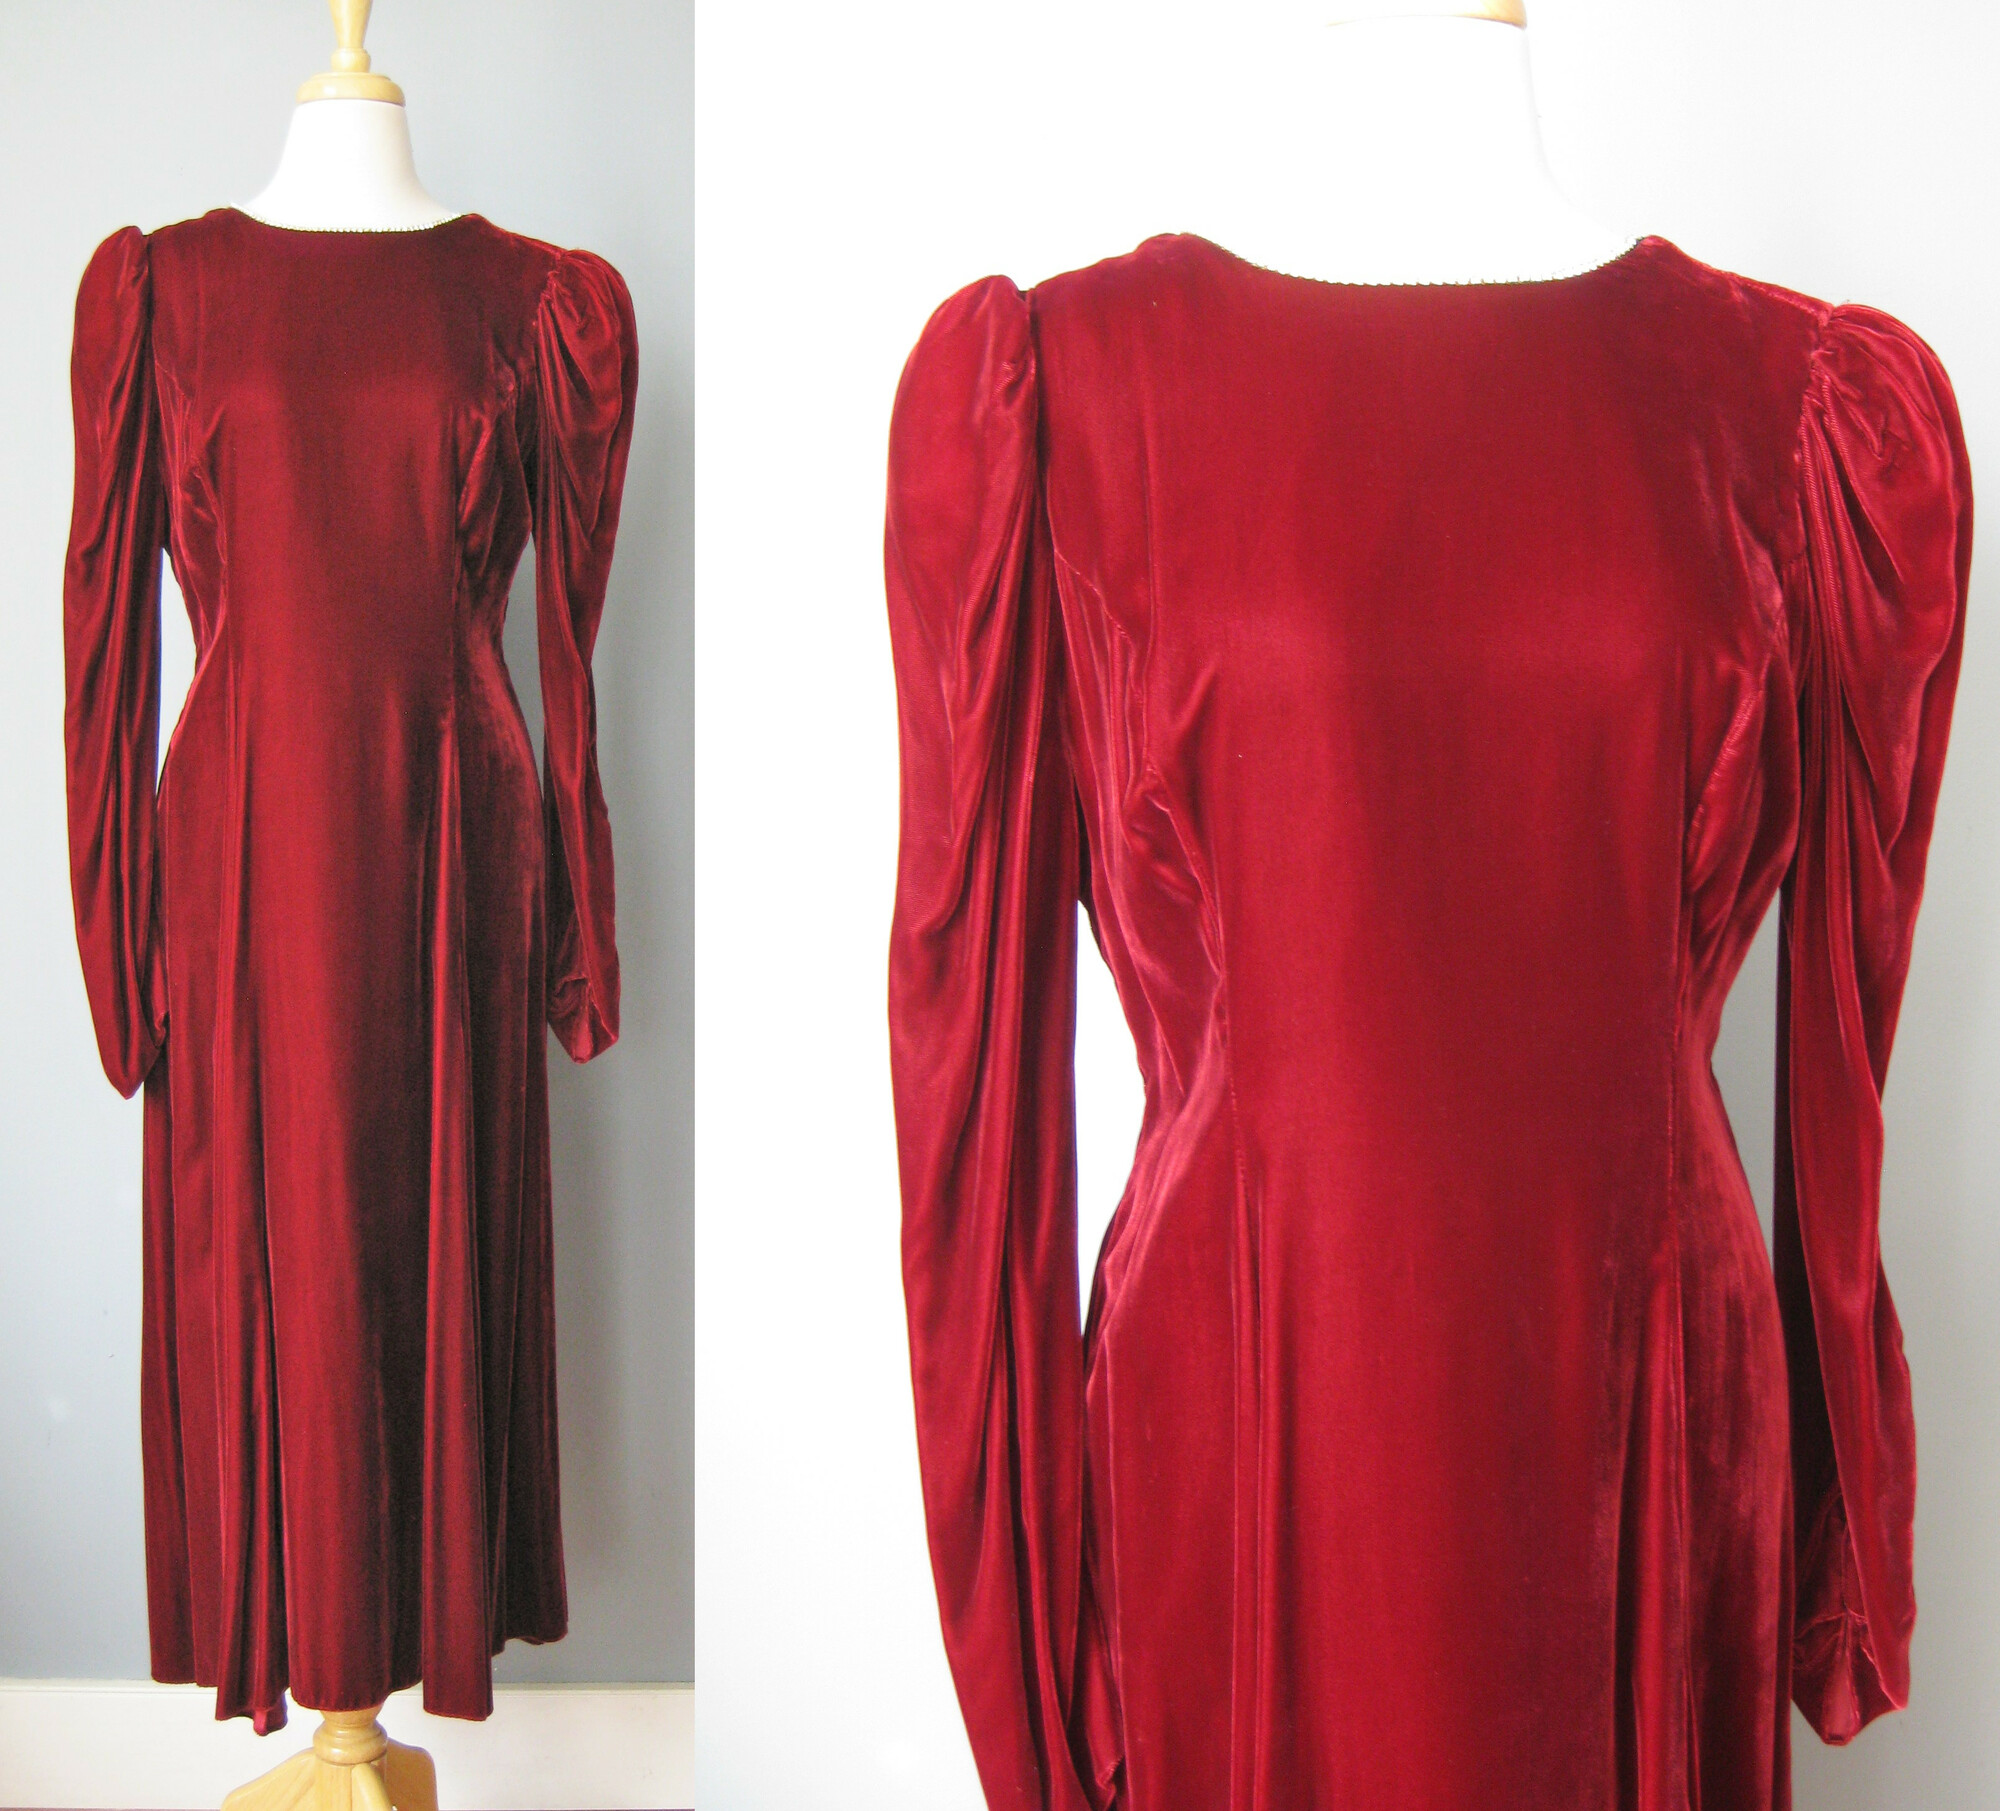 A deep rich red rayon / burgundy velvet gown from the 1980s.
Very dramatic with puffed sleeves, a high neck and a deep v open back.
The entire neckline, from and back opening are decorated with a single row of metal set rhinesontes.
 small, a bit subtle but will definitely sparkle.
The long sleeves end in a point giving the look a very renaissance feel. snap closure here
Bodice is lined
Skirt is full and fluid
Colored union label
made in the USA
It's just gorgeous and in amazing condition!

It's marked size 18 but please use measurements below, will be better on a modern size medium
Shoulder to shoulder: 14.5
armpit to armpit: 18.25
waist: 16.5
hip: up to 23
Underarm sleeve seam length: 16.5
length: 49 (probably ankle length depending on how tall you are)

Thanks for looking!
#38056